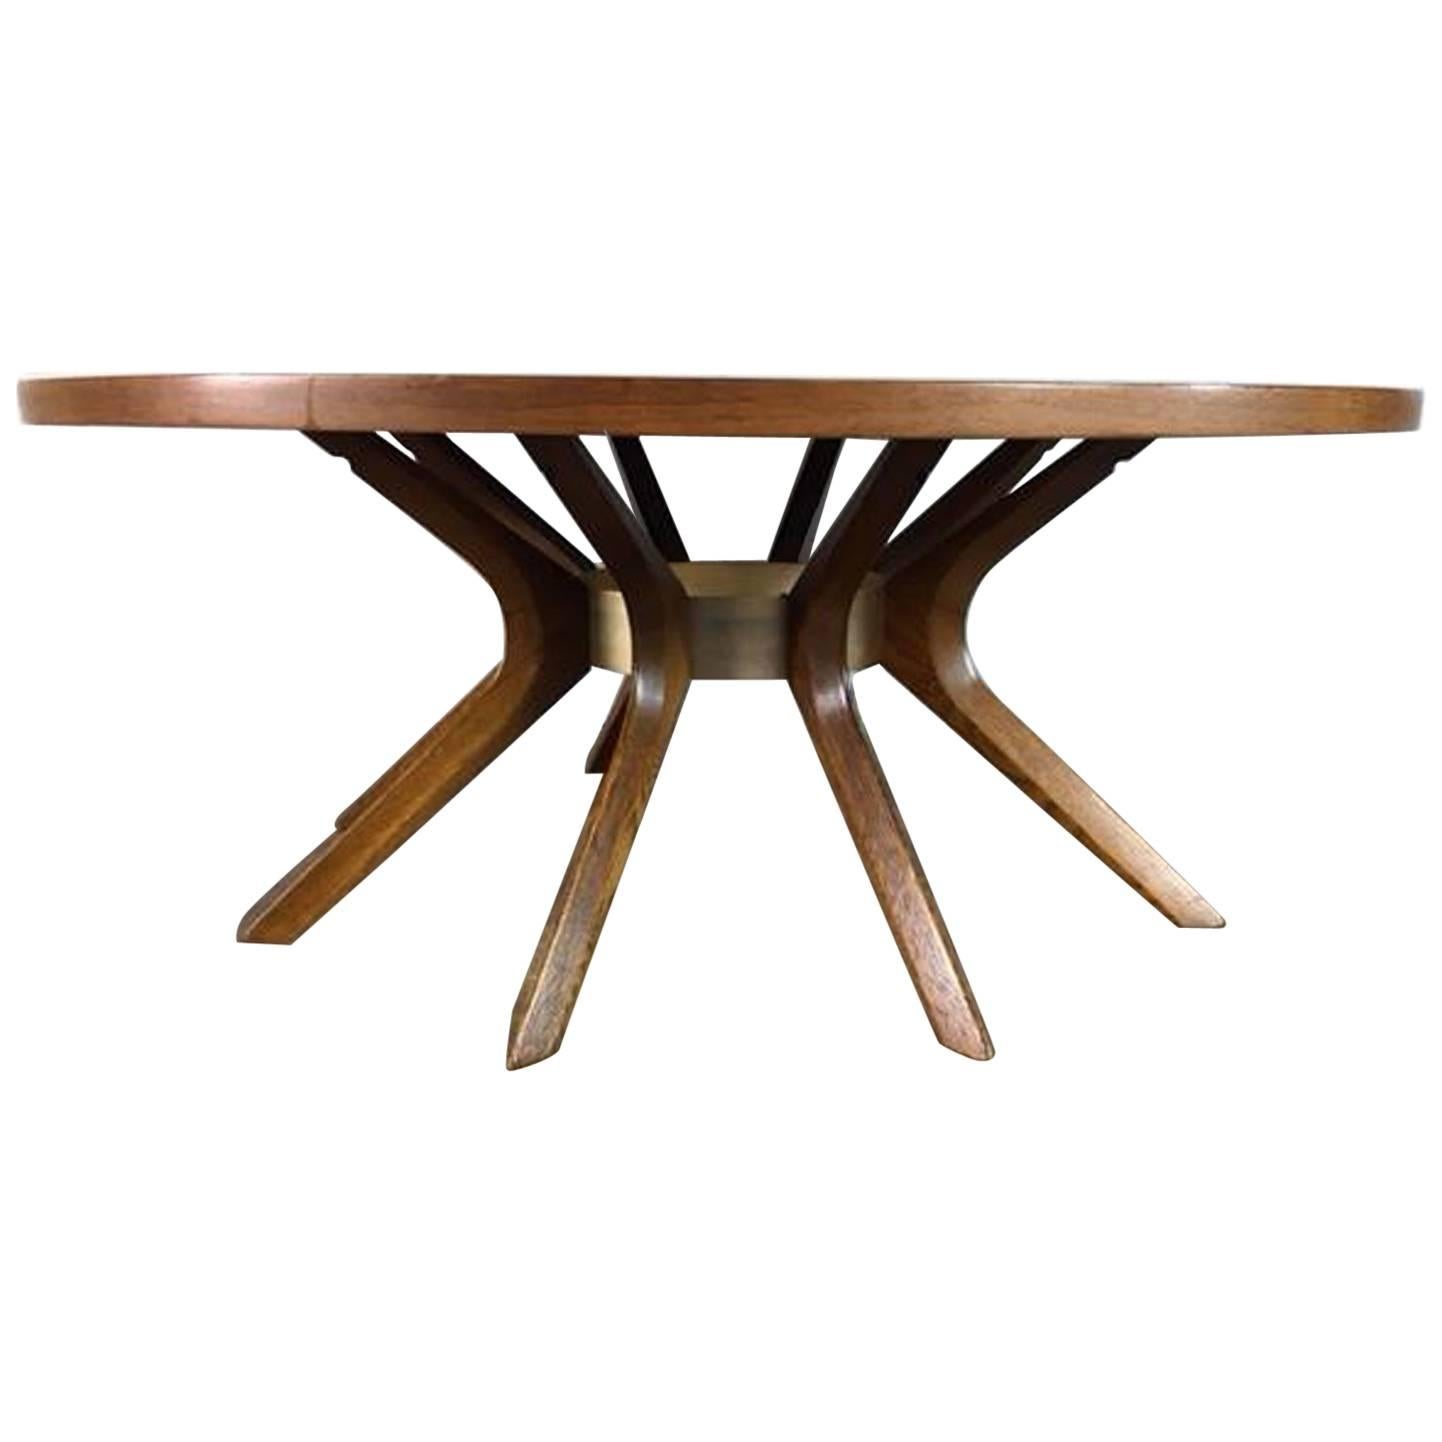 Brasilia Cathedral Coffee Table by Broyhill